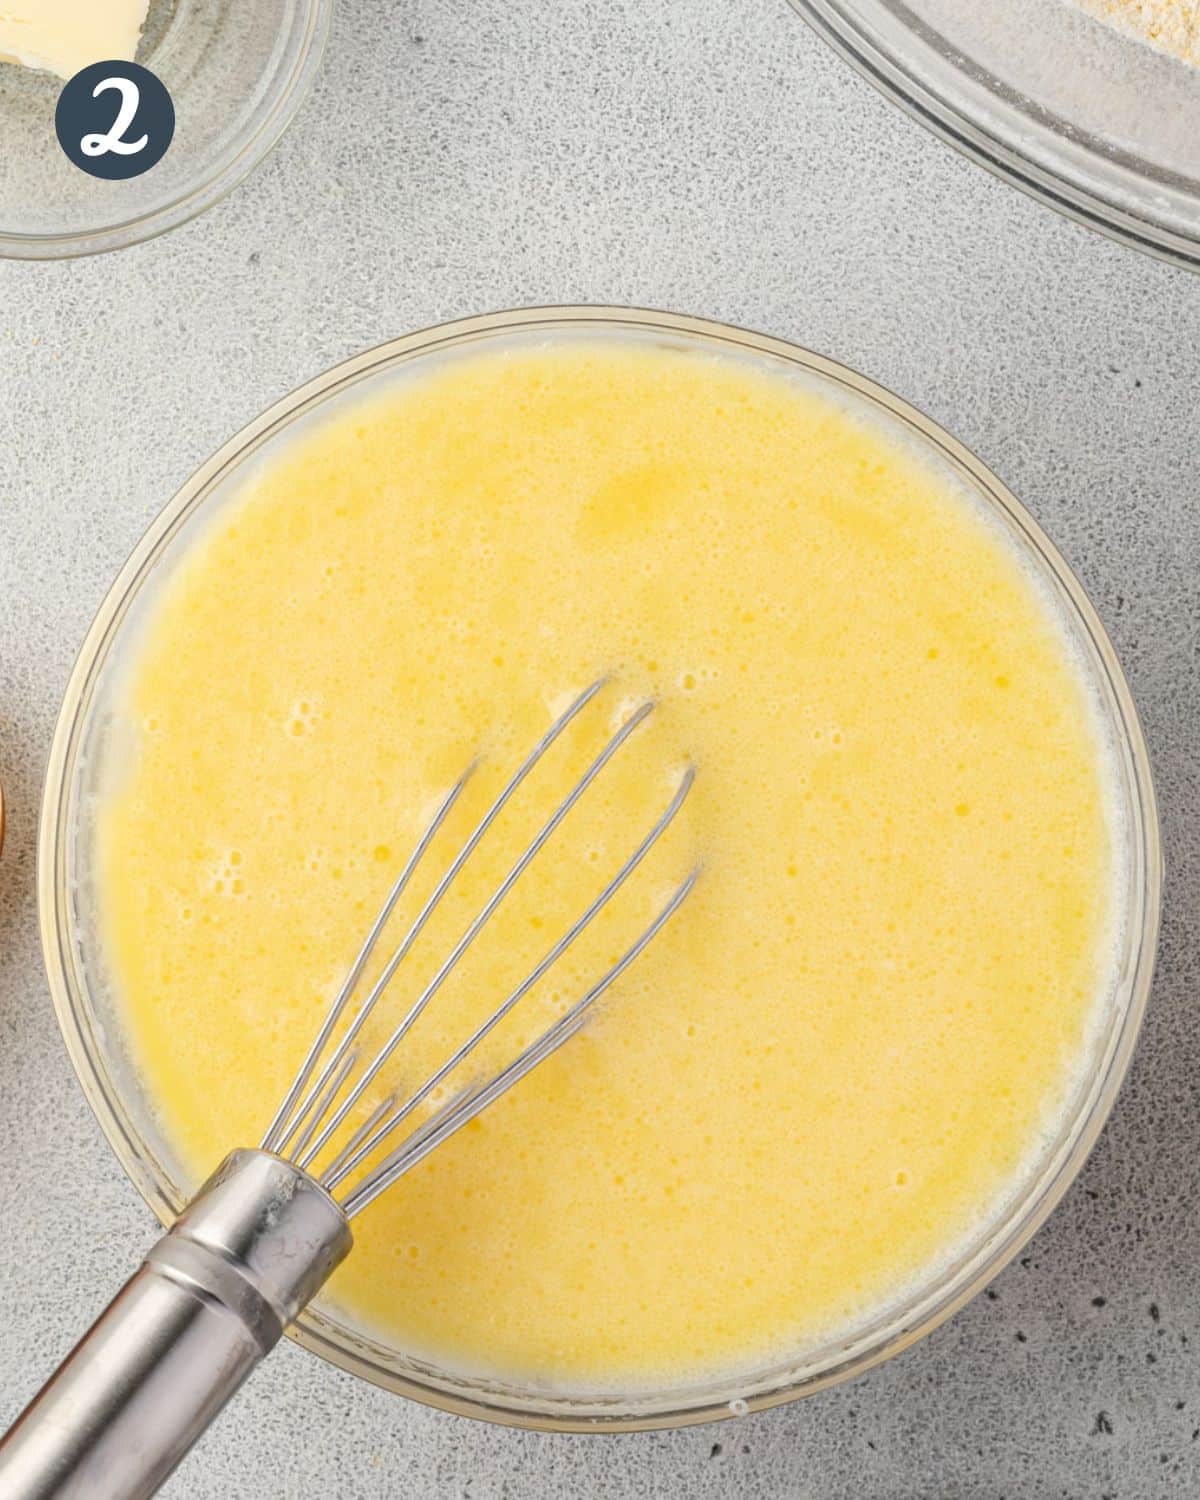 Whisking the butter, milk, and egg in a bowl.